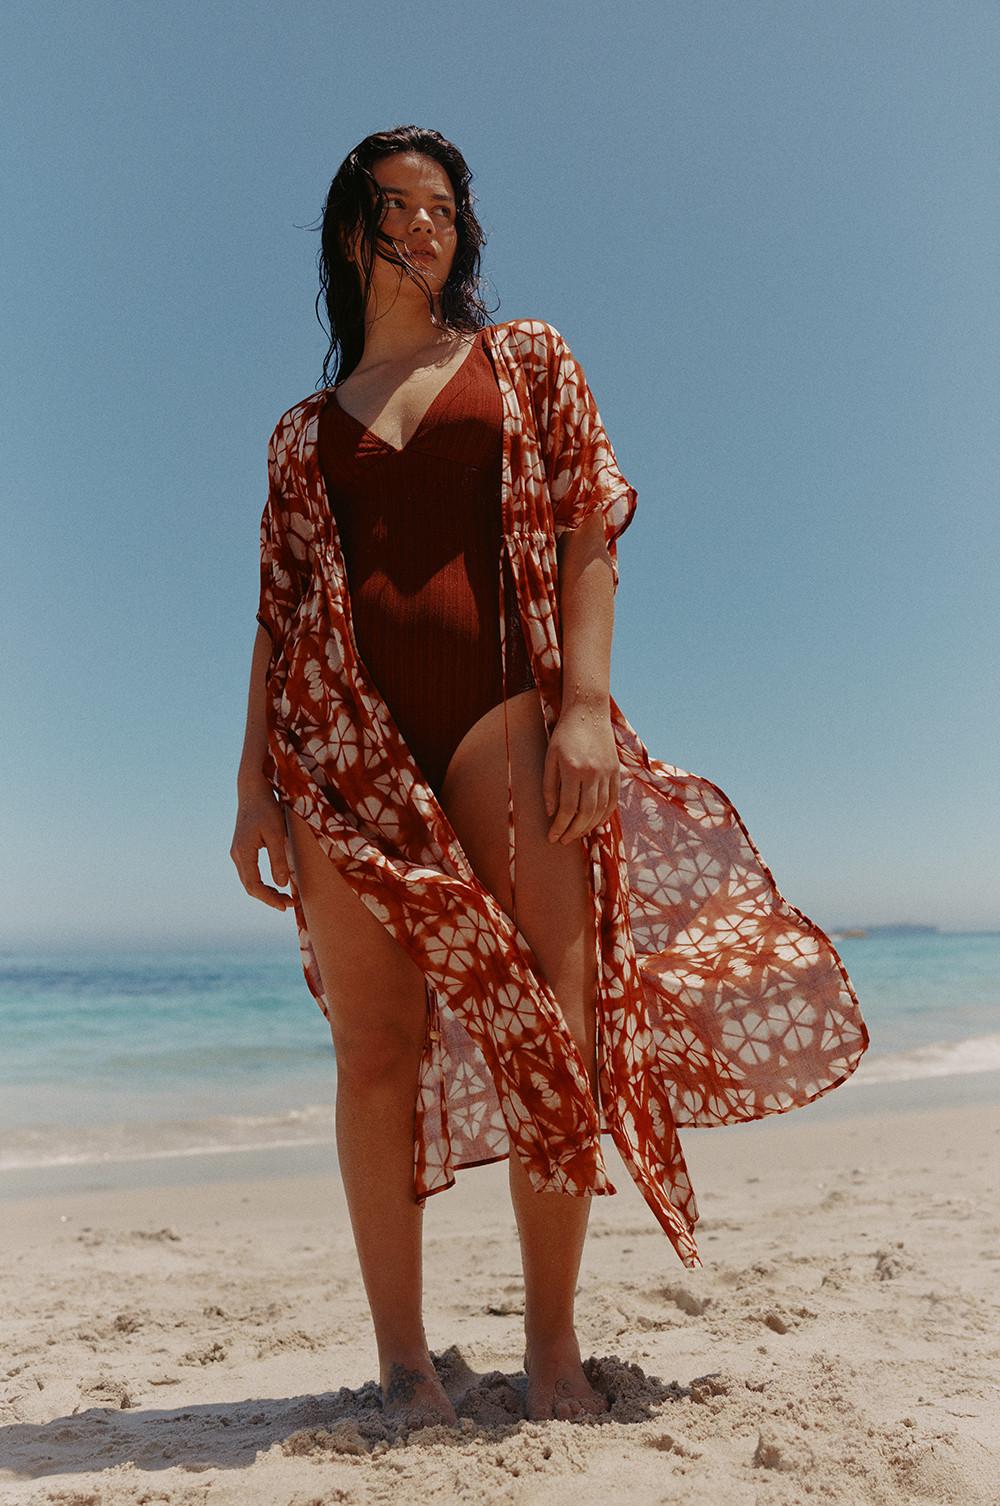 Primark have a new swimwear collection and it's AMAZING - heat